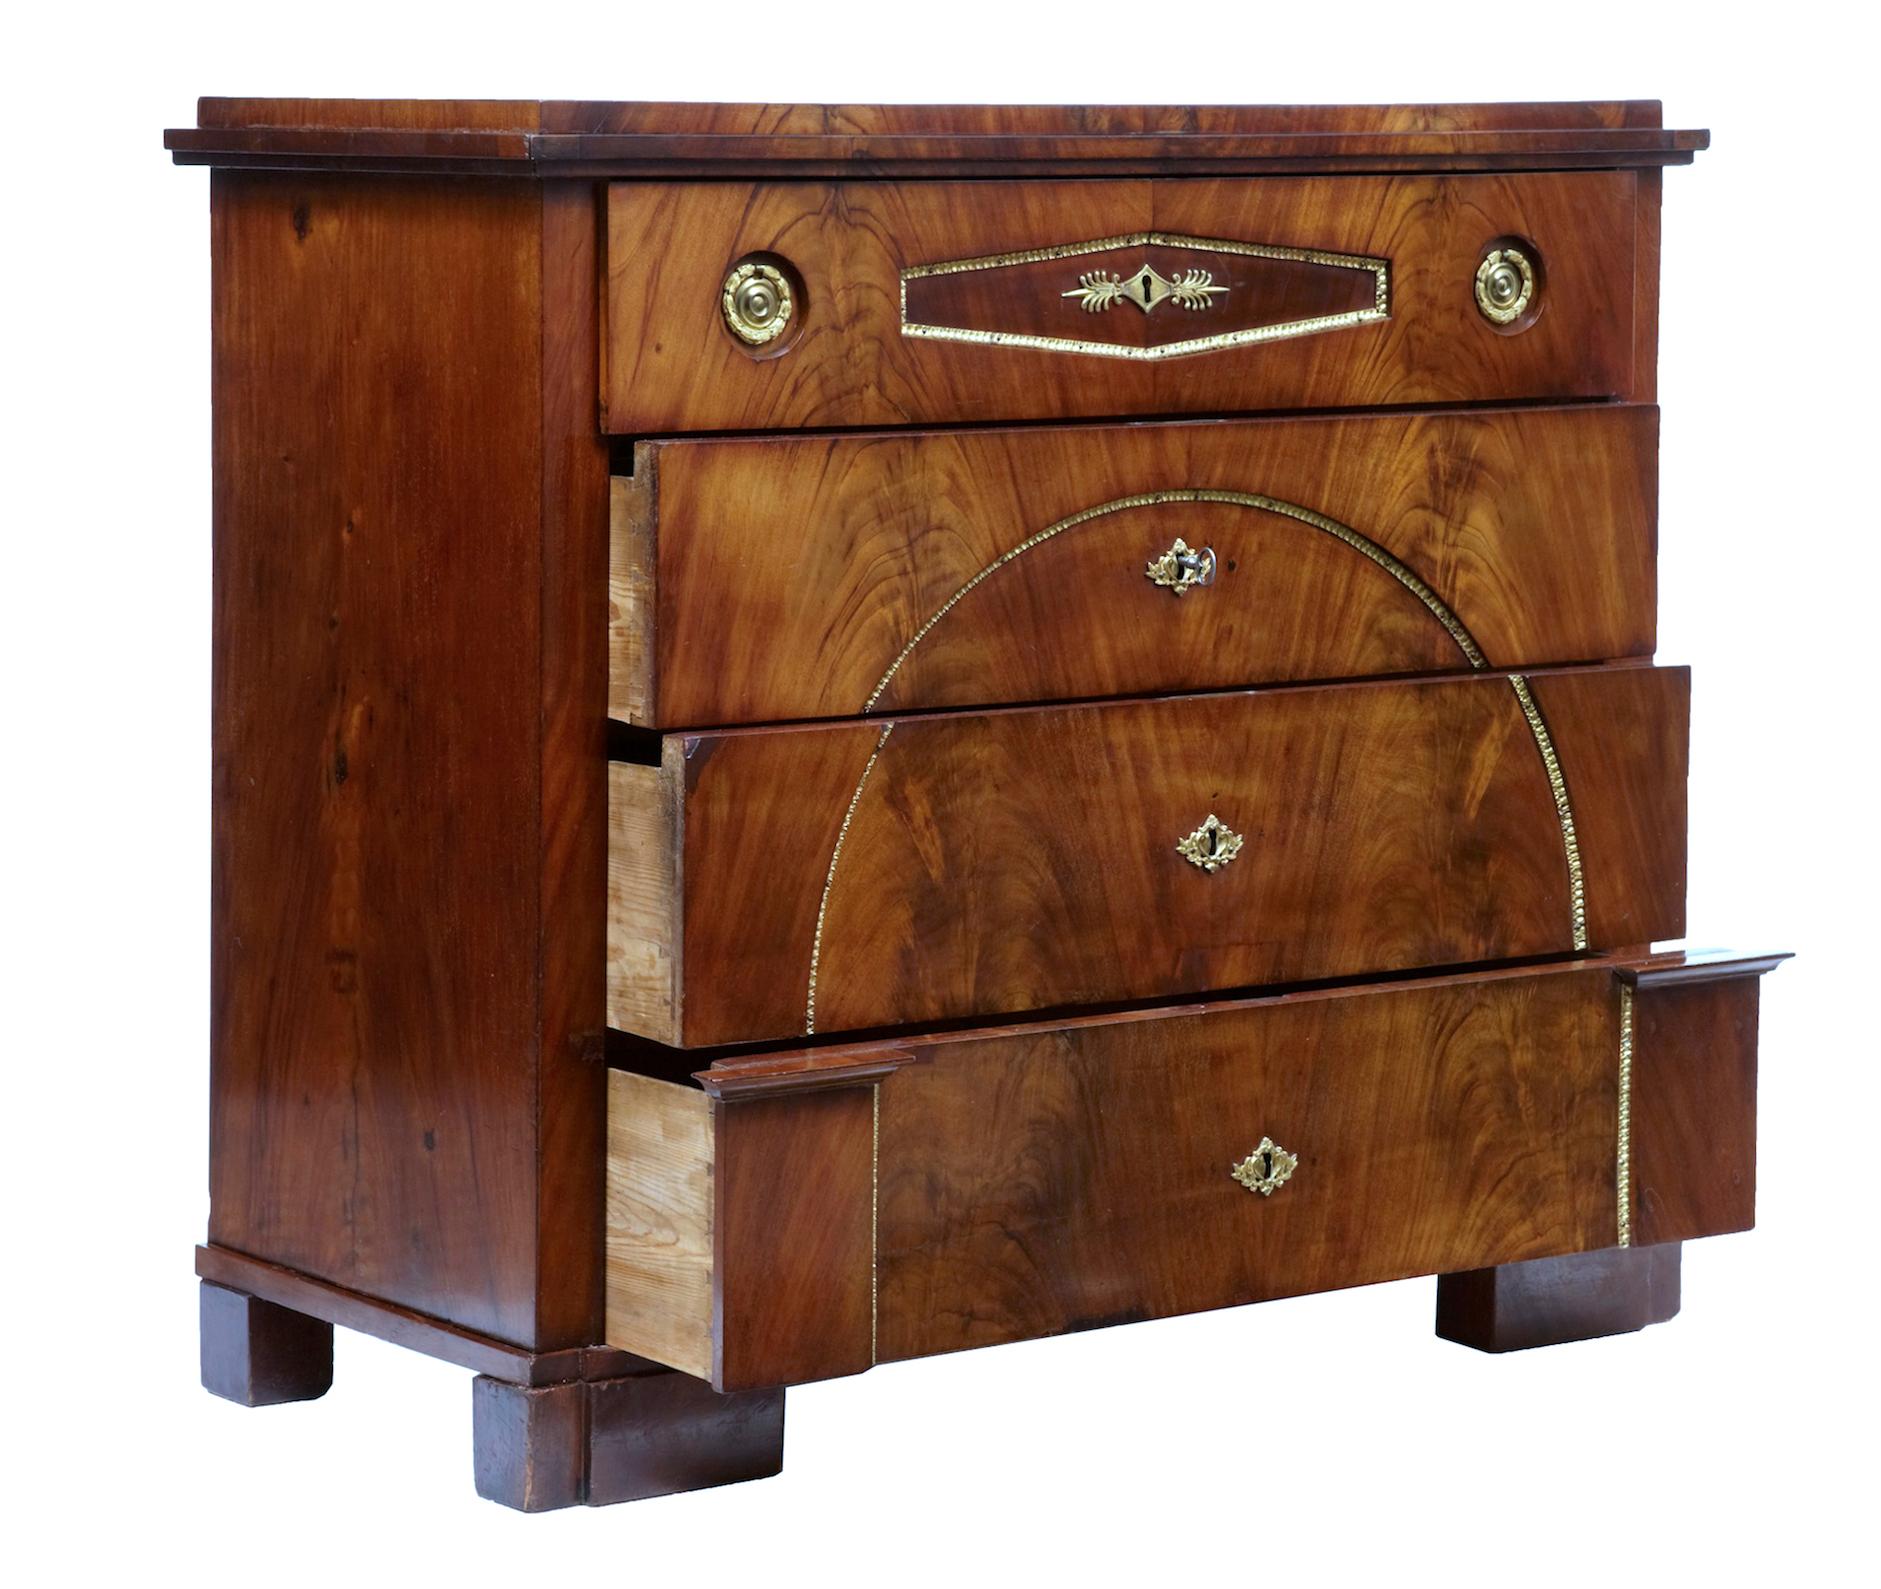 Biedermeier period Swedish mahogany secretaire chest of drawers, circa 1810.

Stunning secretaire chest in rich mahogany. 4 drawer chest with architectural elements to the bottom drawer.

Top drawer pulls out and lowers to create a small writing